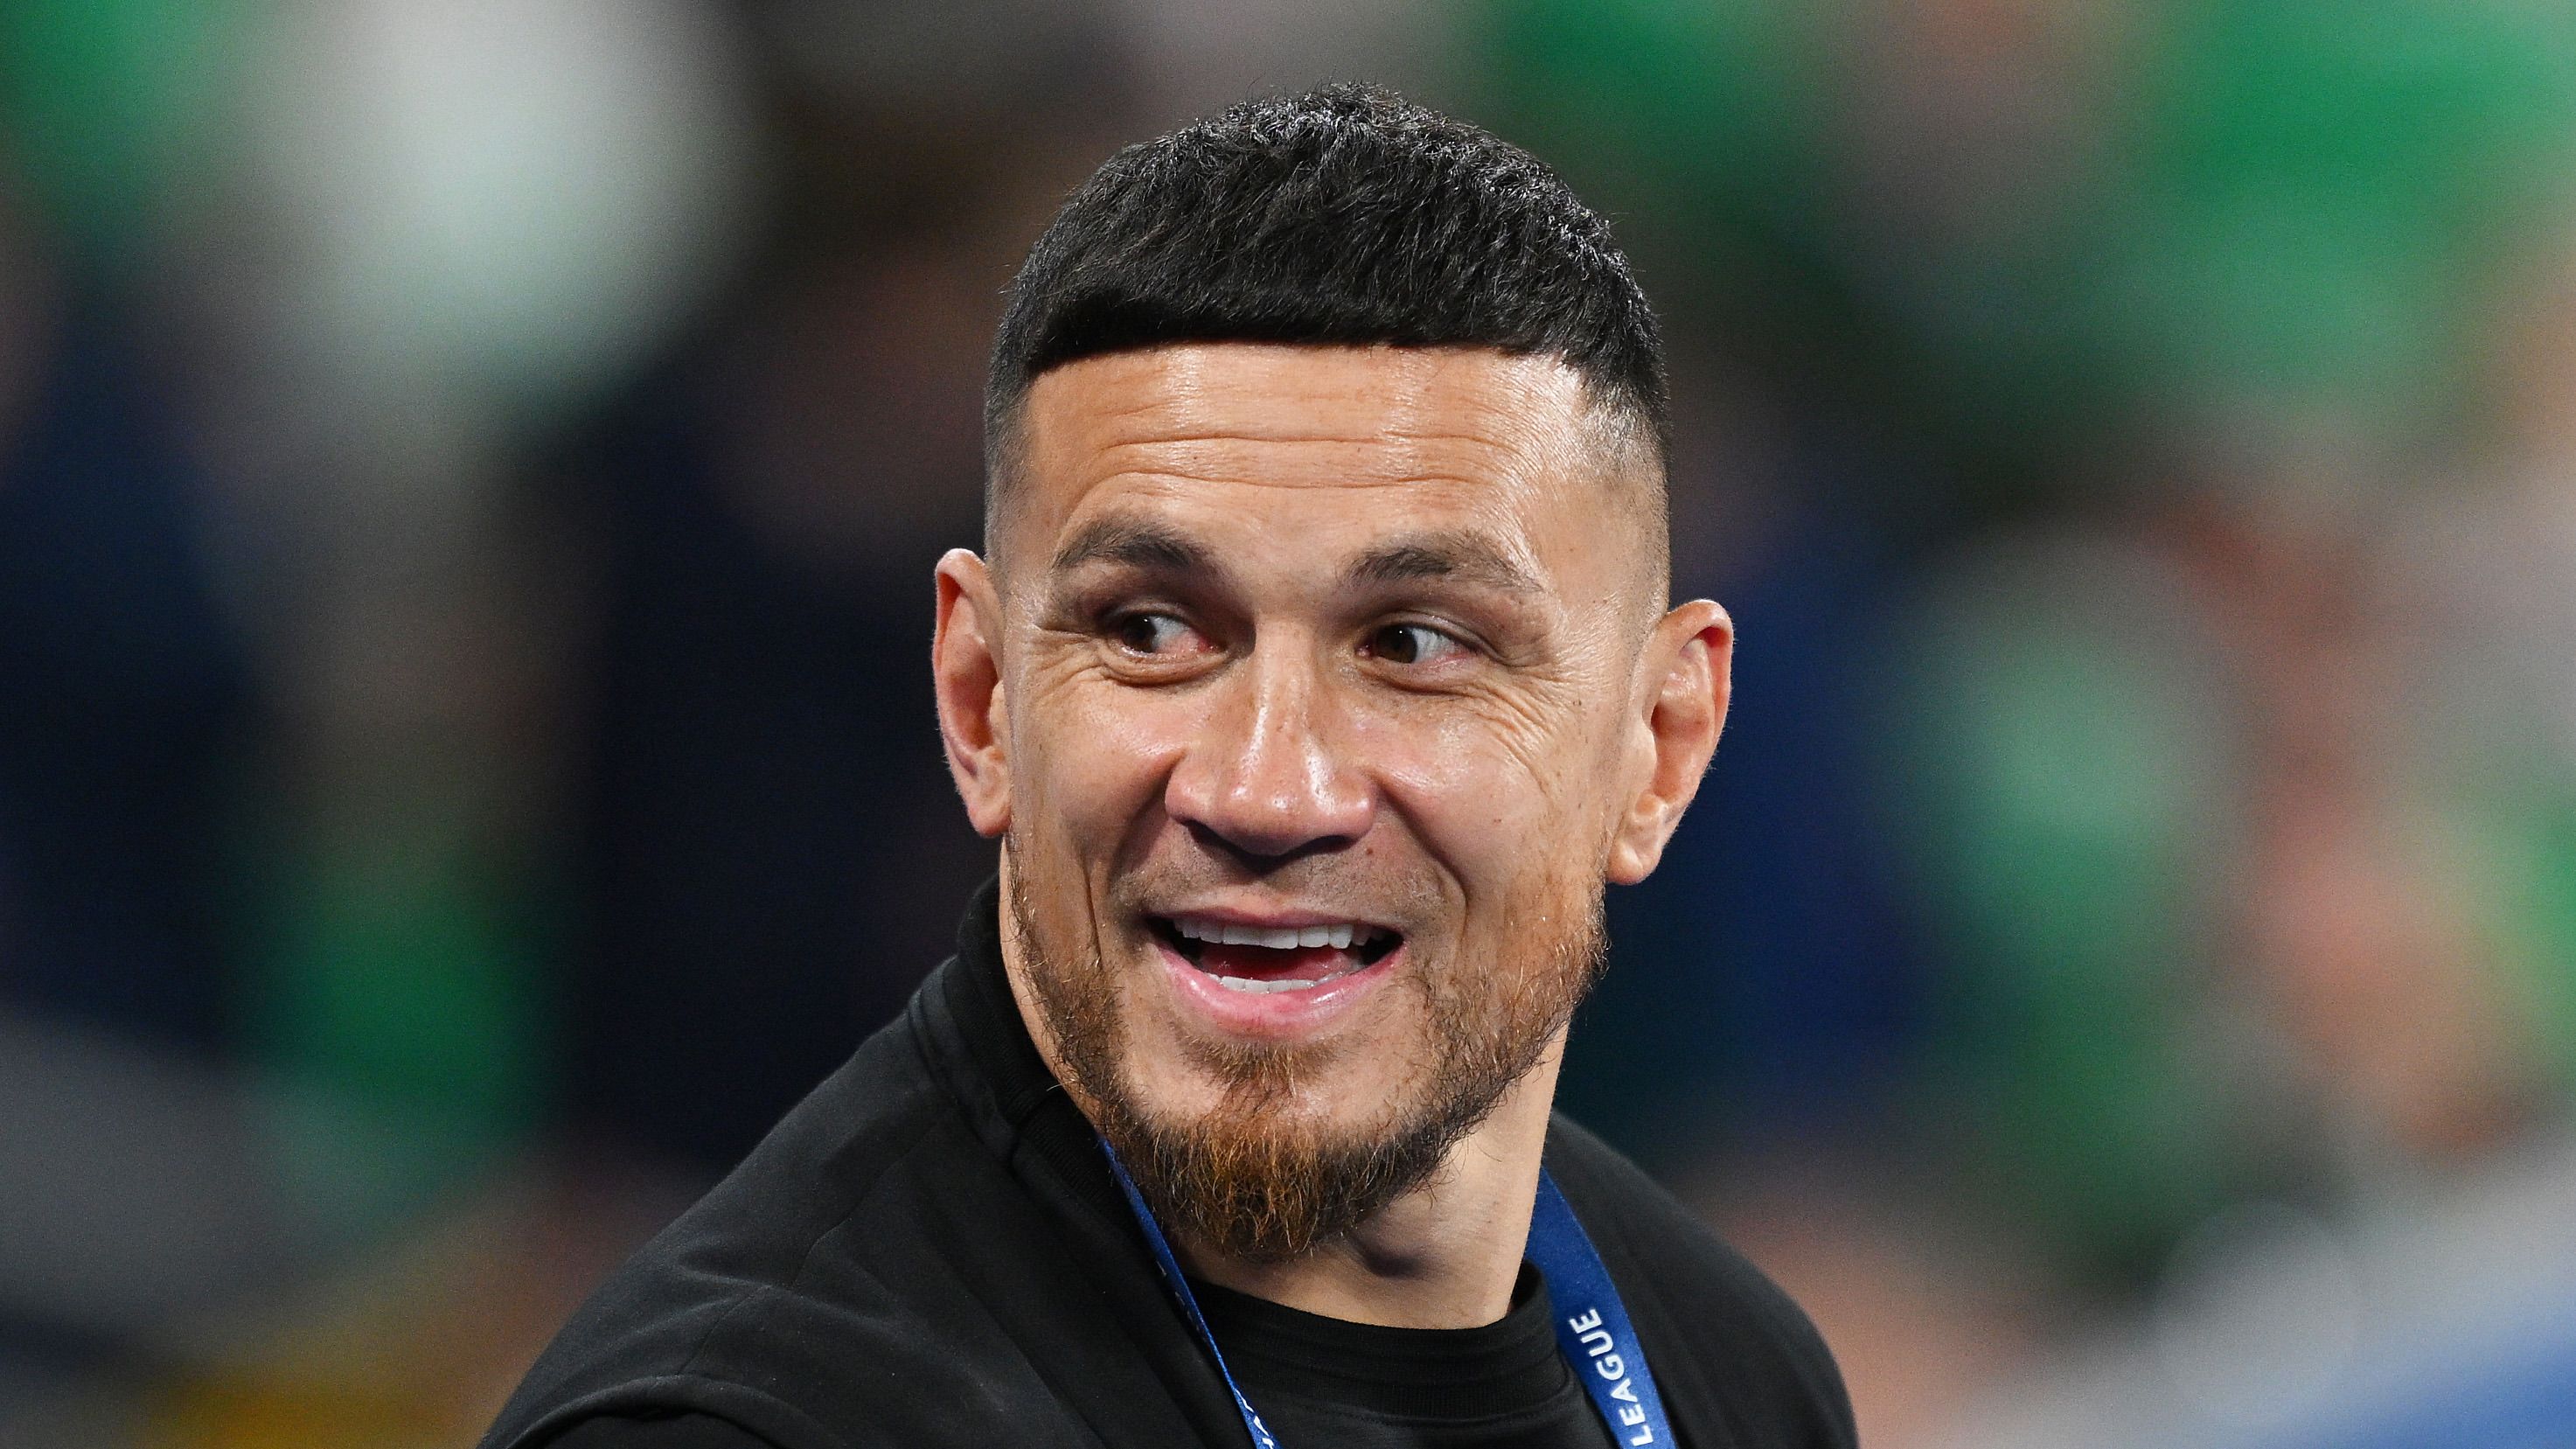 Former All Blacks player Sonny Bill Williams looks on prior to the Rugby World Cup France quarter-final match between Ireland and New Zealand.